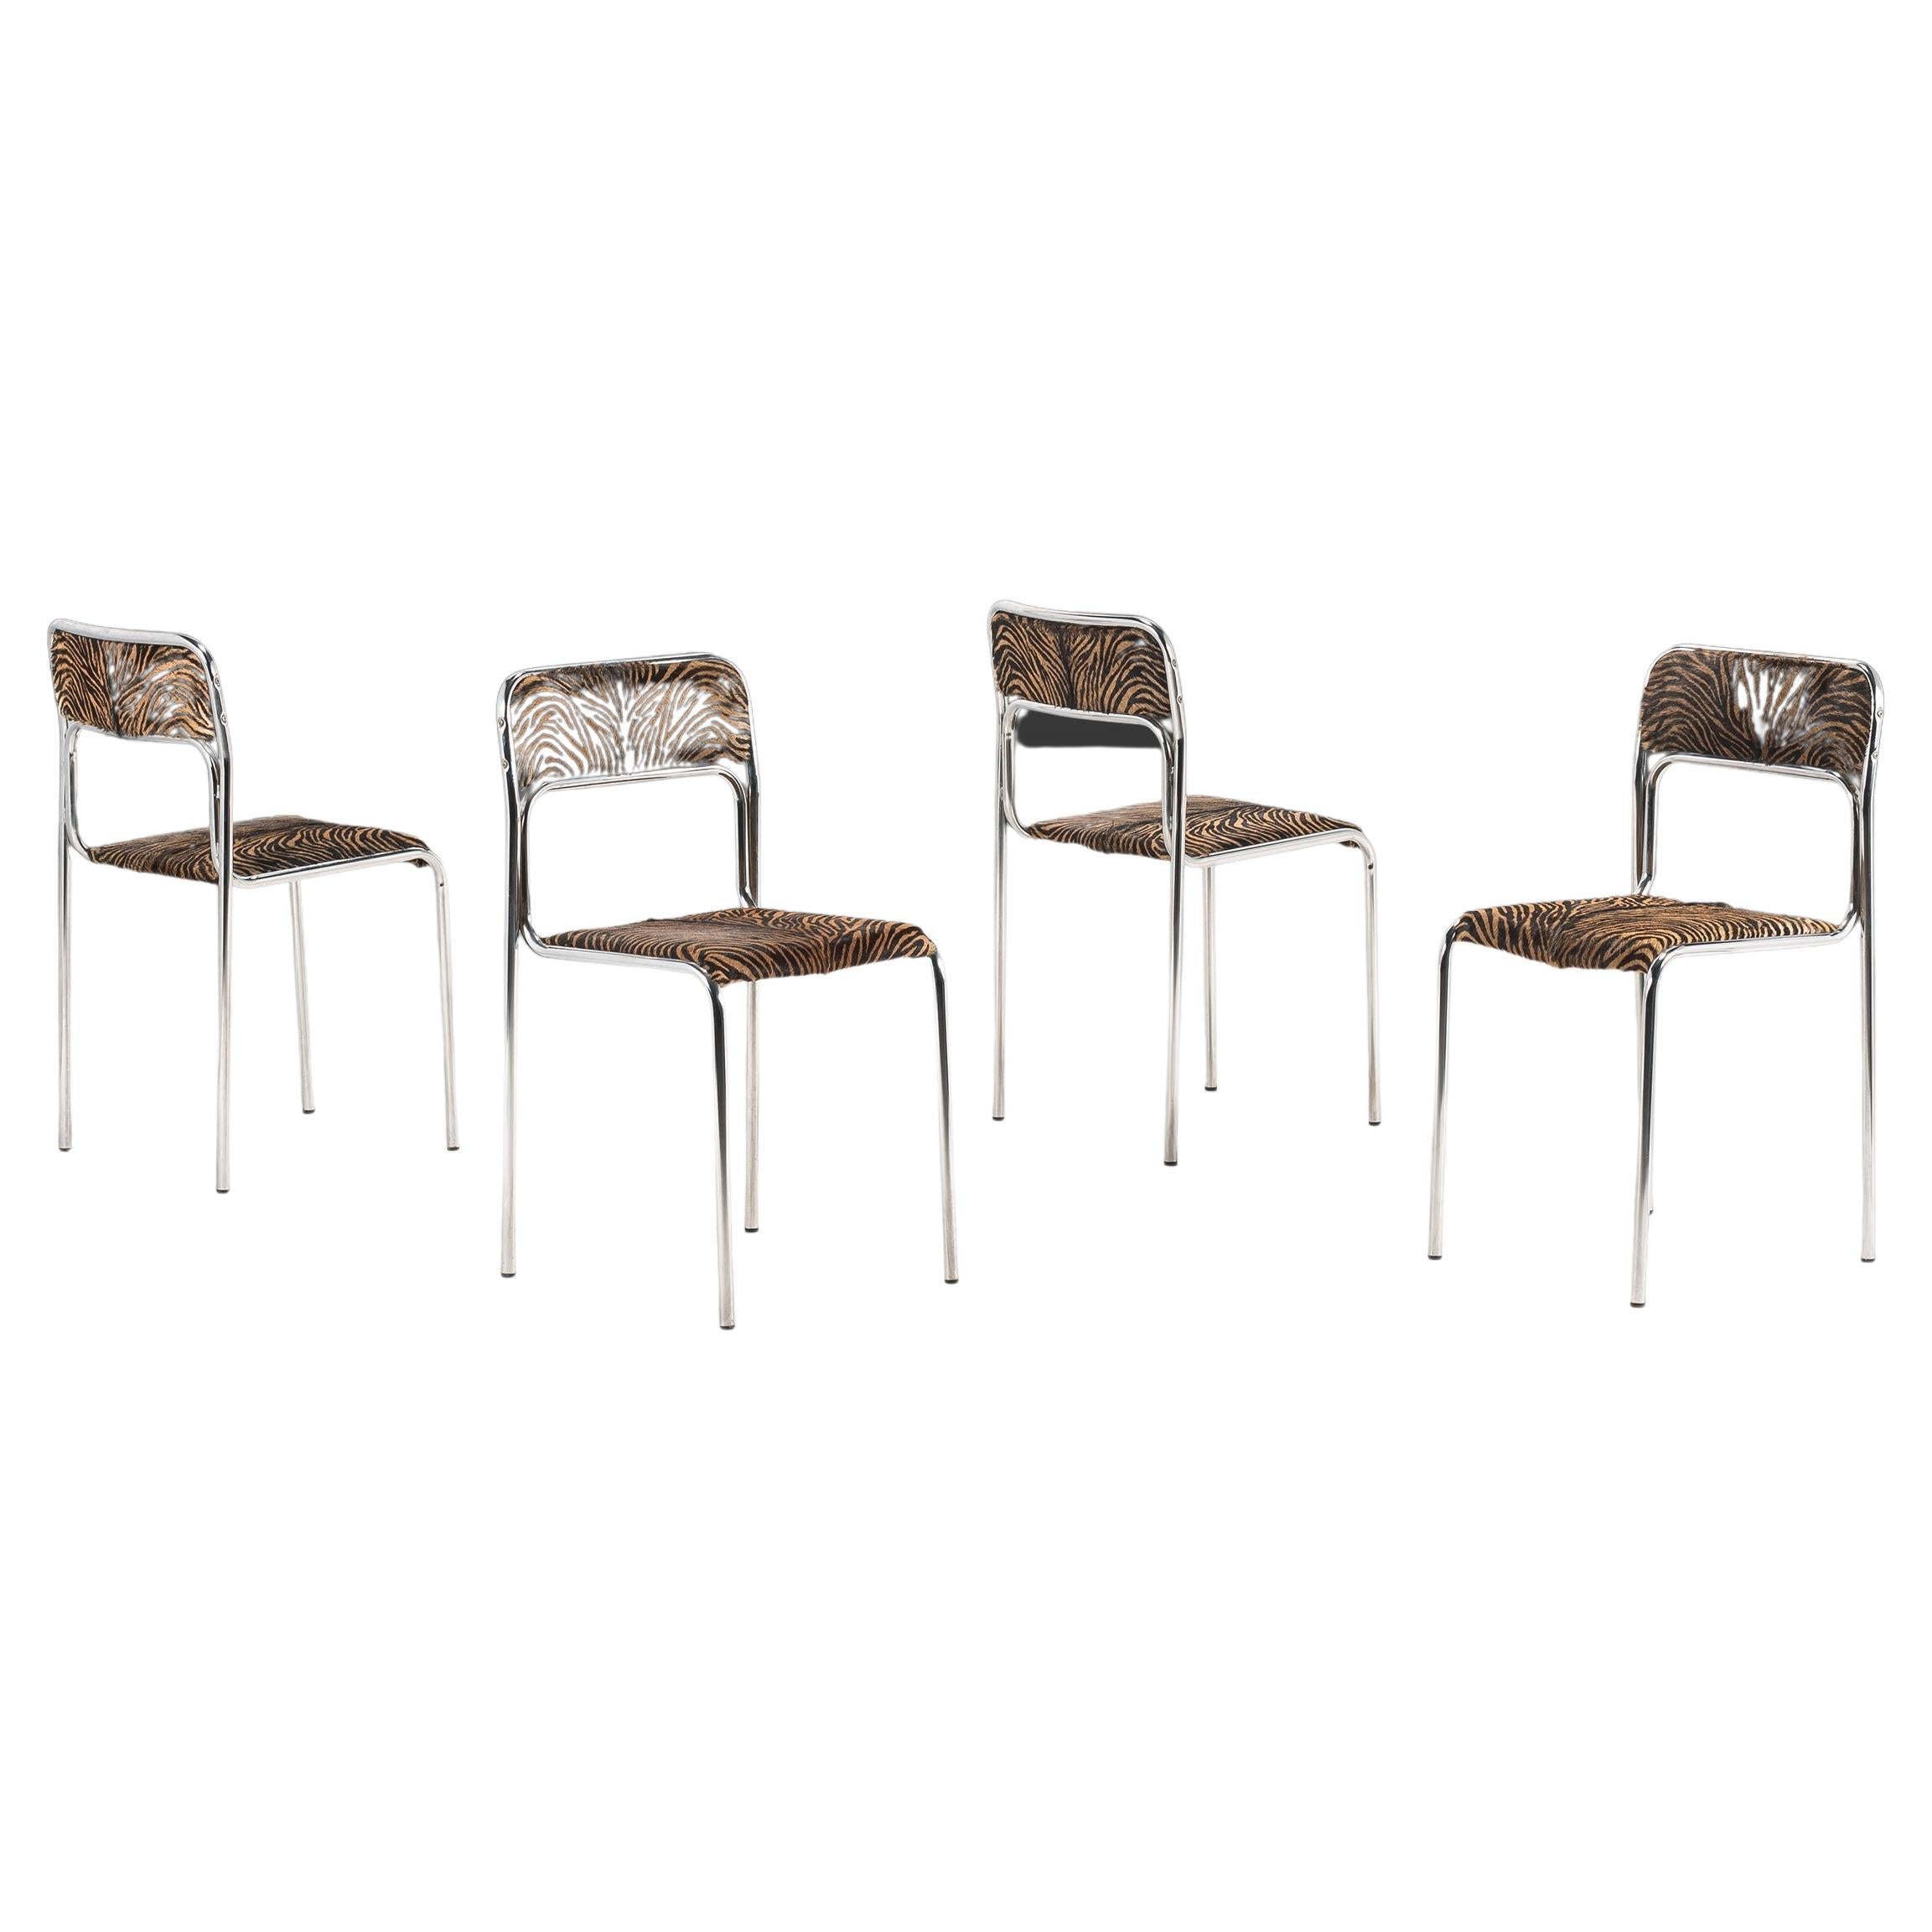 Set of Four '4' Italian Dining Chairs Attributed to Otto Gerdau, Italy, c. 1970s